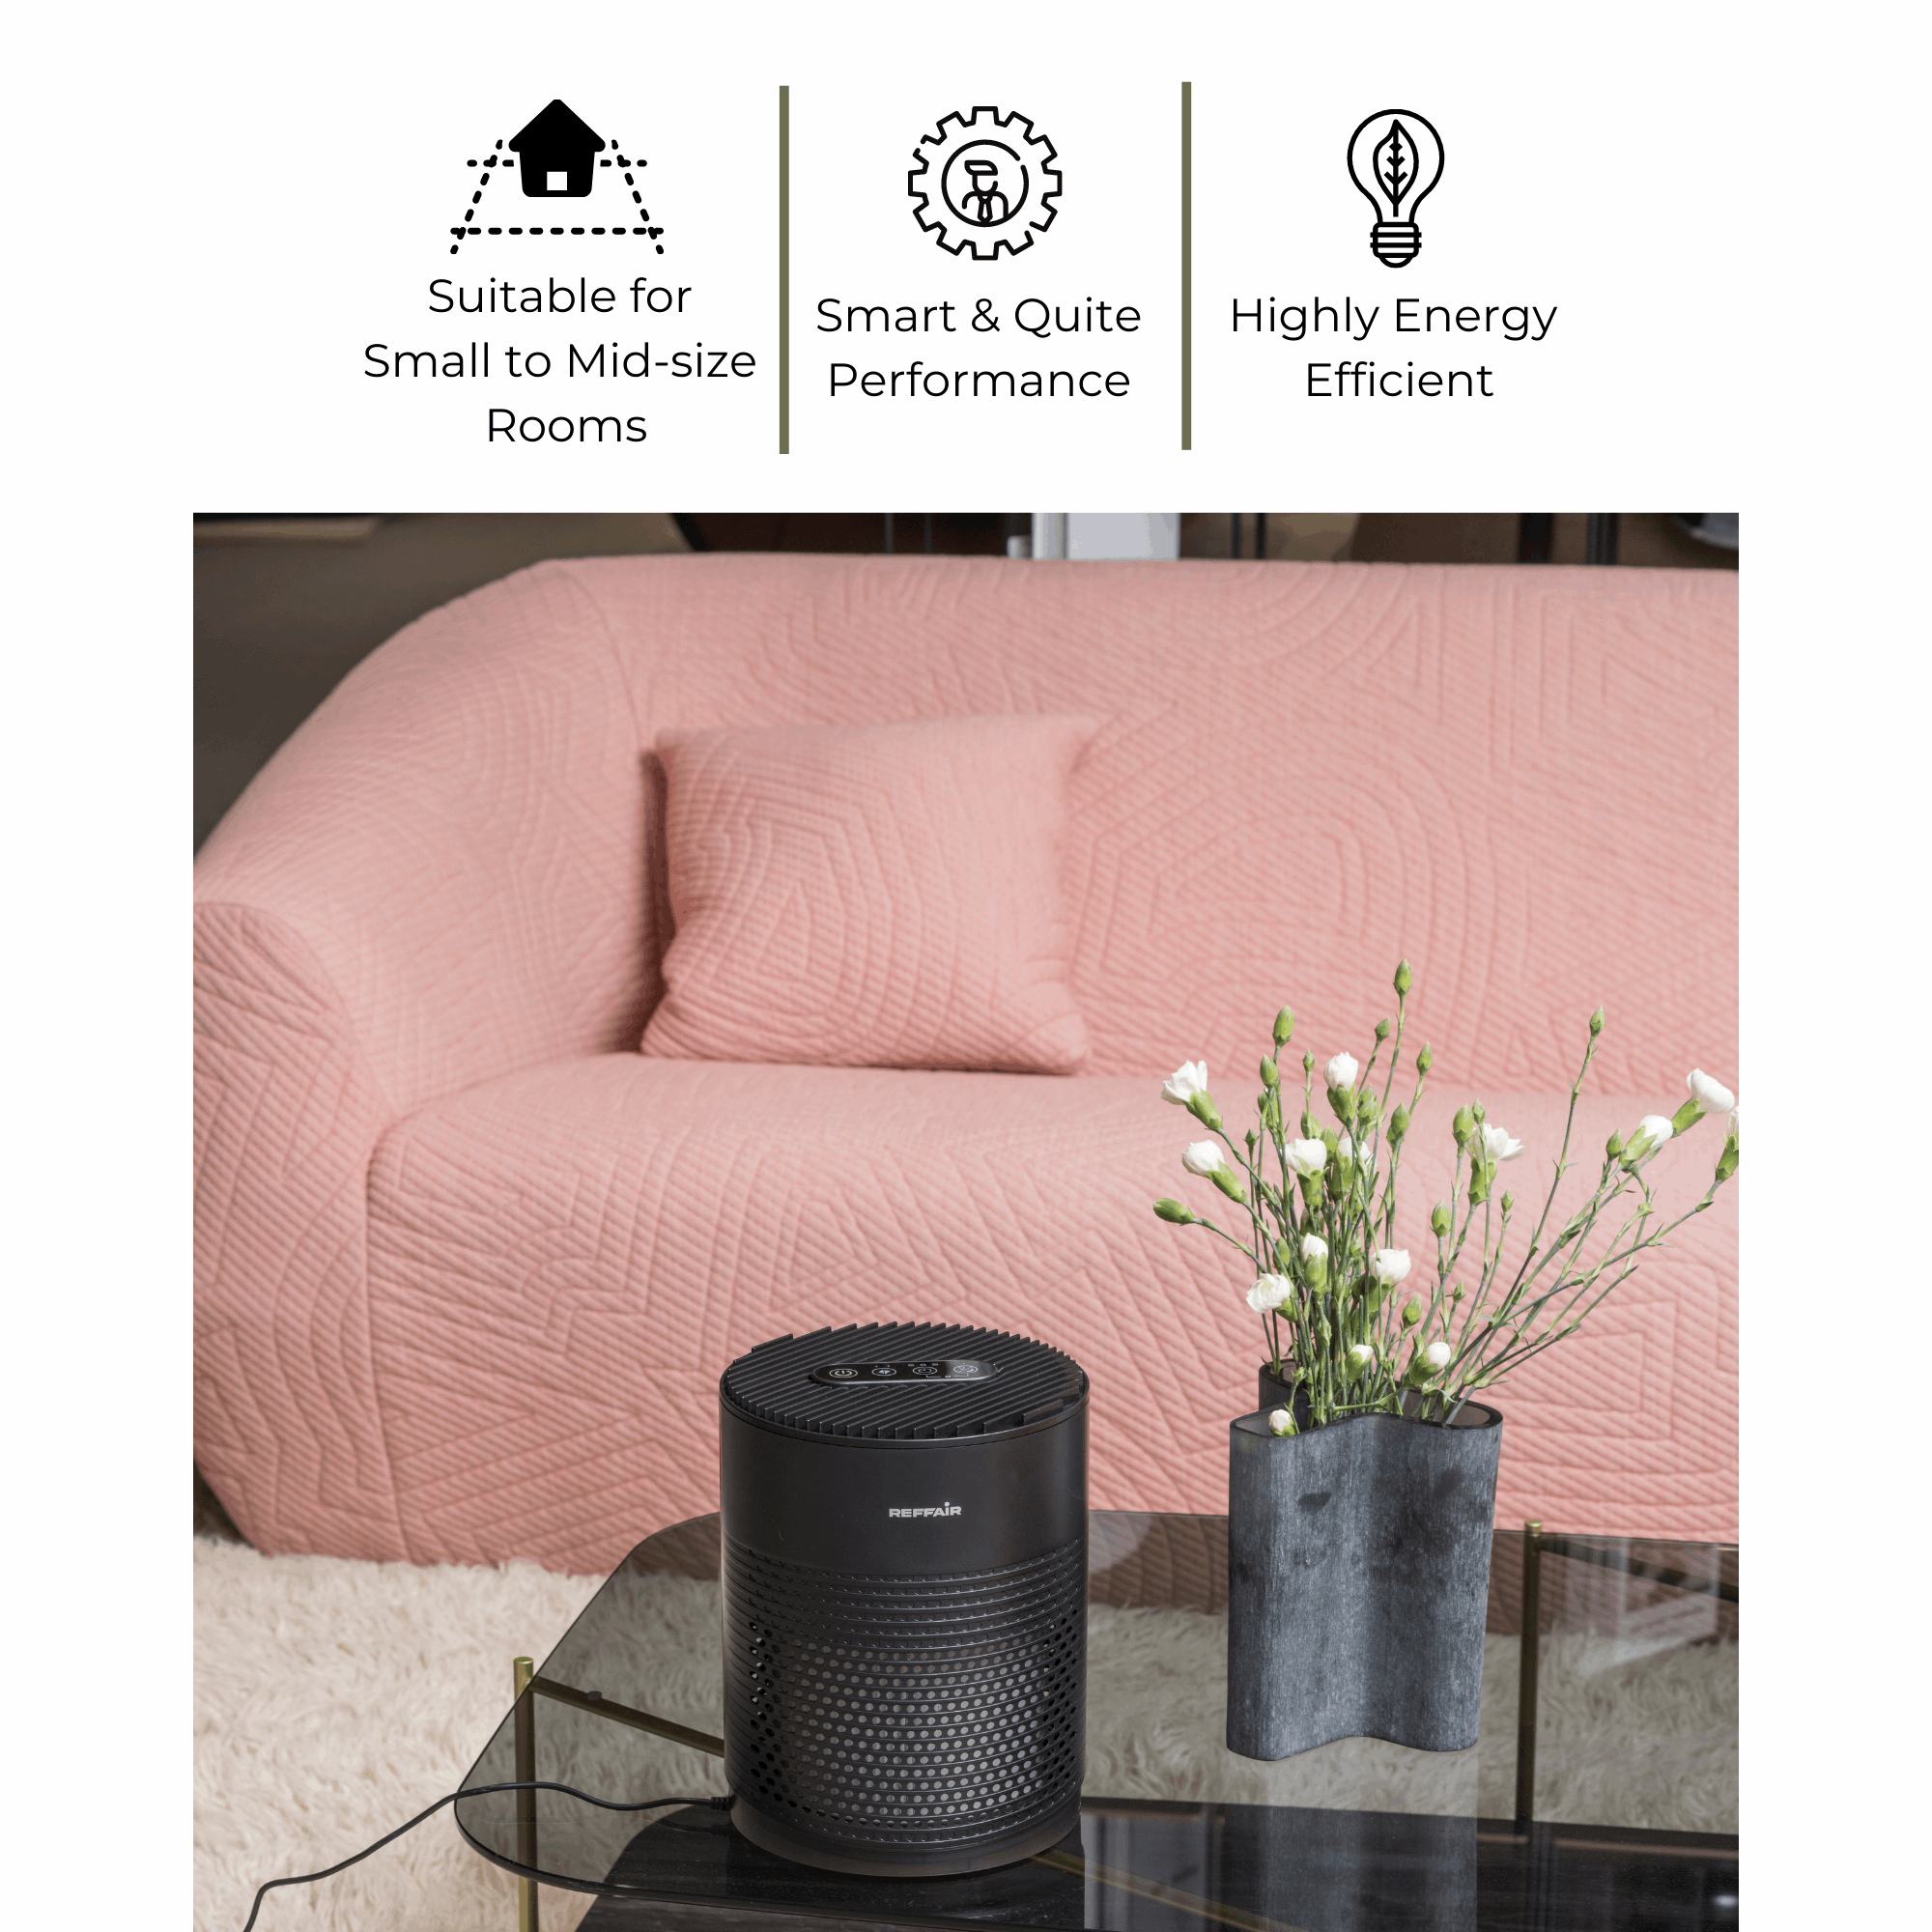 LivAir - Room Air Purifier for Home & Office | True HEPA Filter with Activated Carbon | Photocatalytic Filtration Technology with UV Function